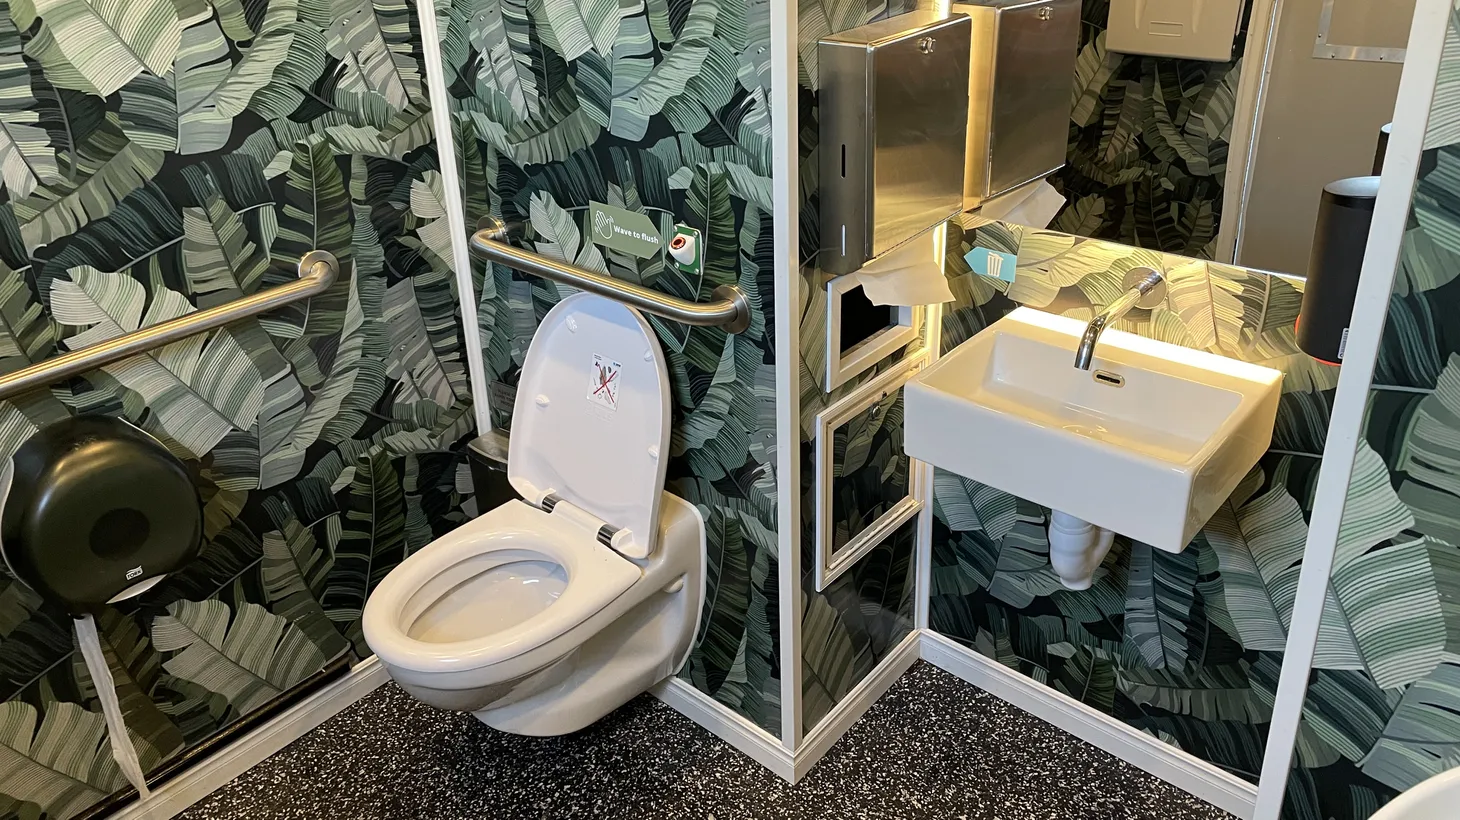 The touchless “Throne” restroom installed at the Westlake/MacArthur Park Metro station features jungle-themed plant wallpaper.